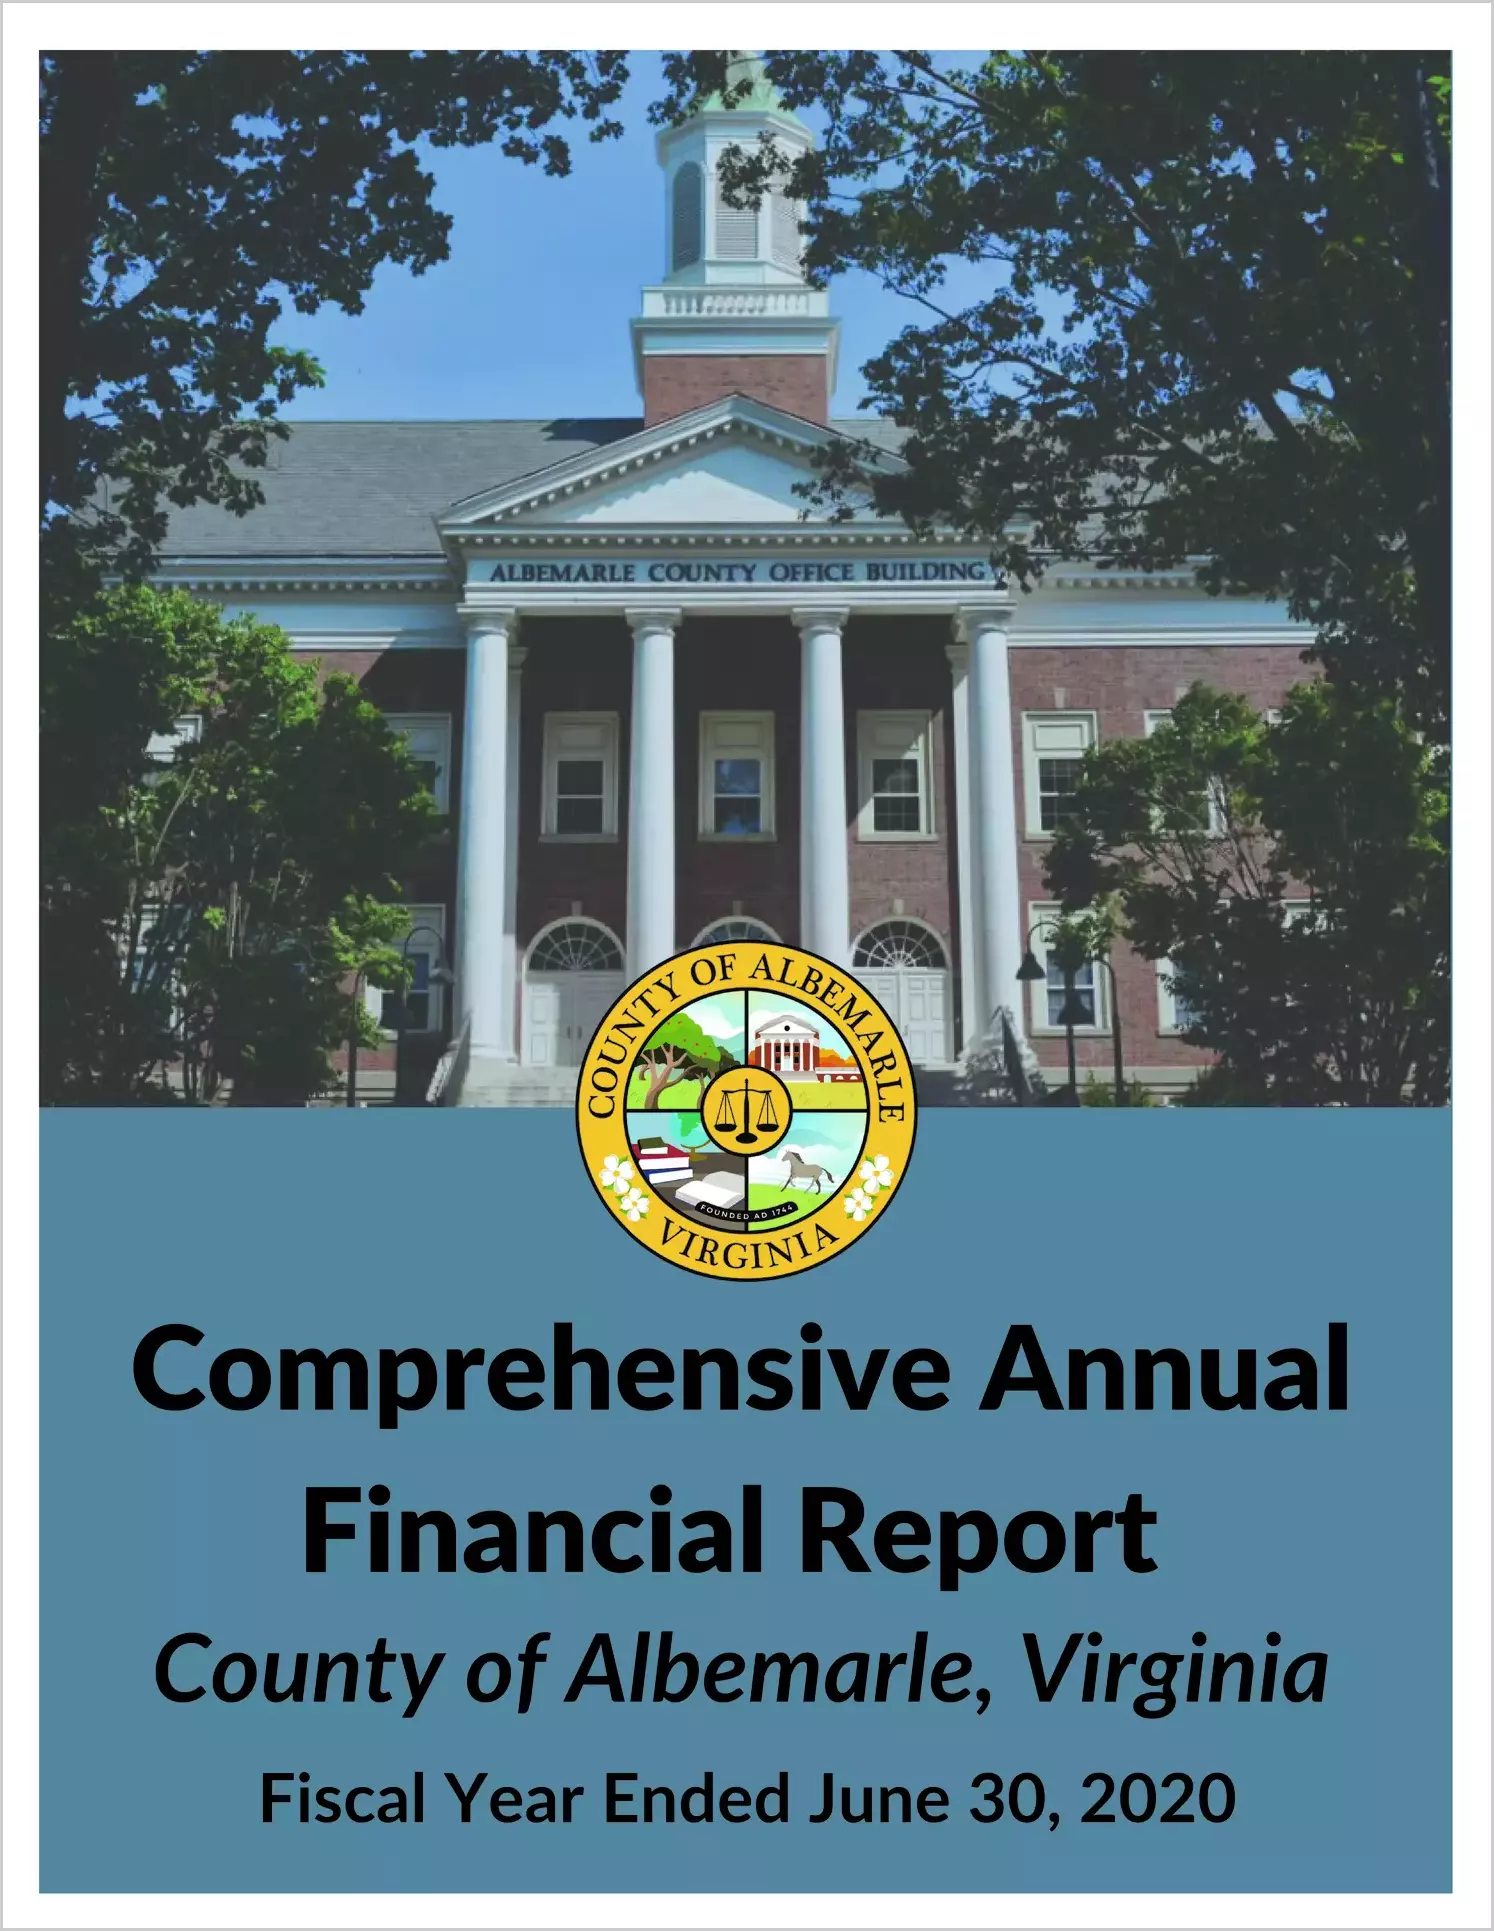 2020 Annual Financial Report for County of Albemarle